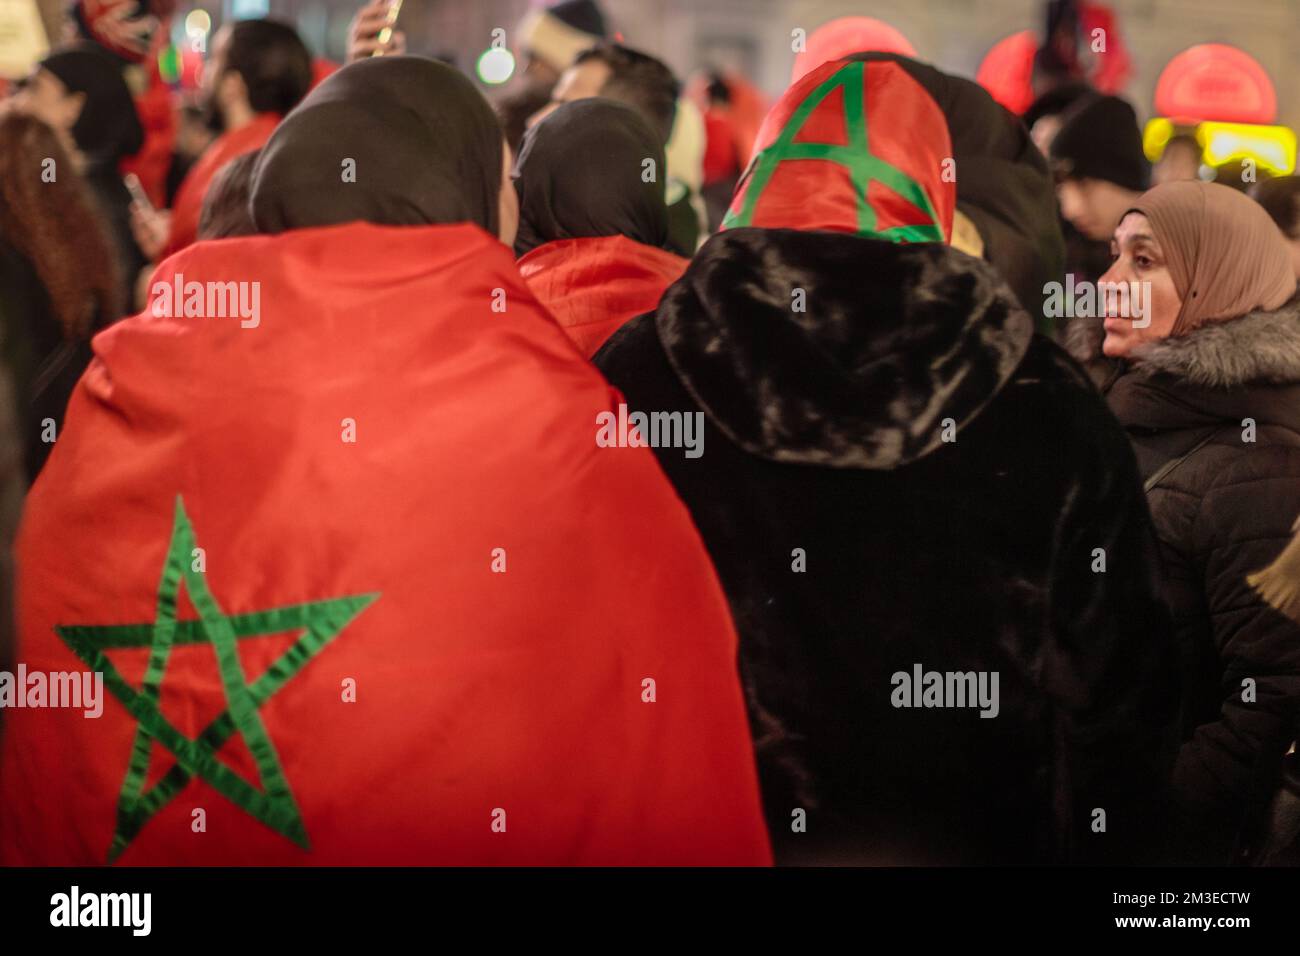 Morocco soccer fans along with arabs, and africans fans celebrates the continued success of the Moroccan football team at Qatar 2022. Stock Photo